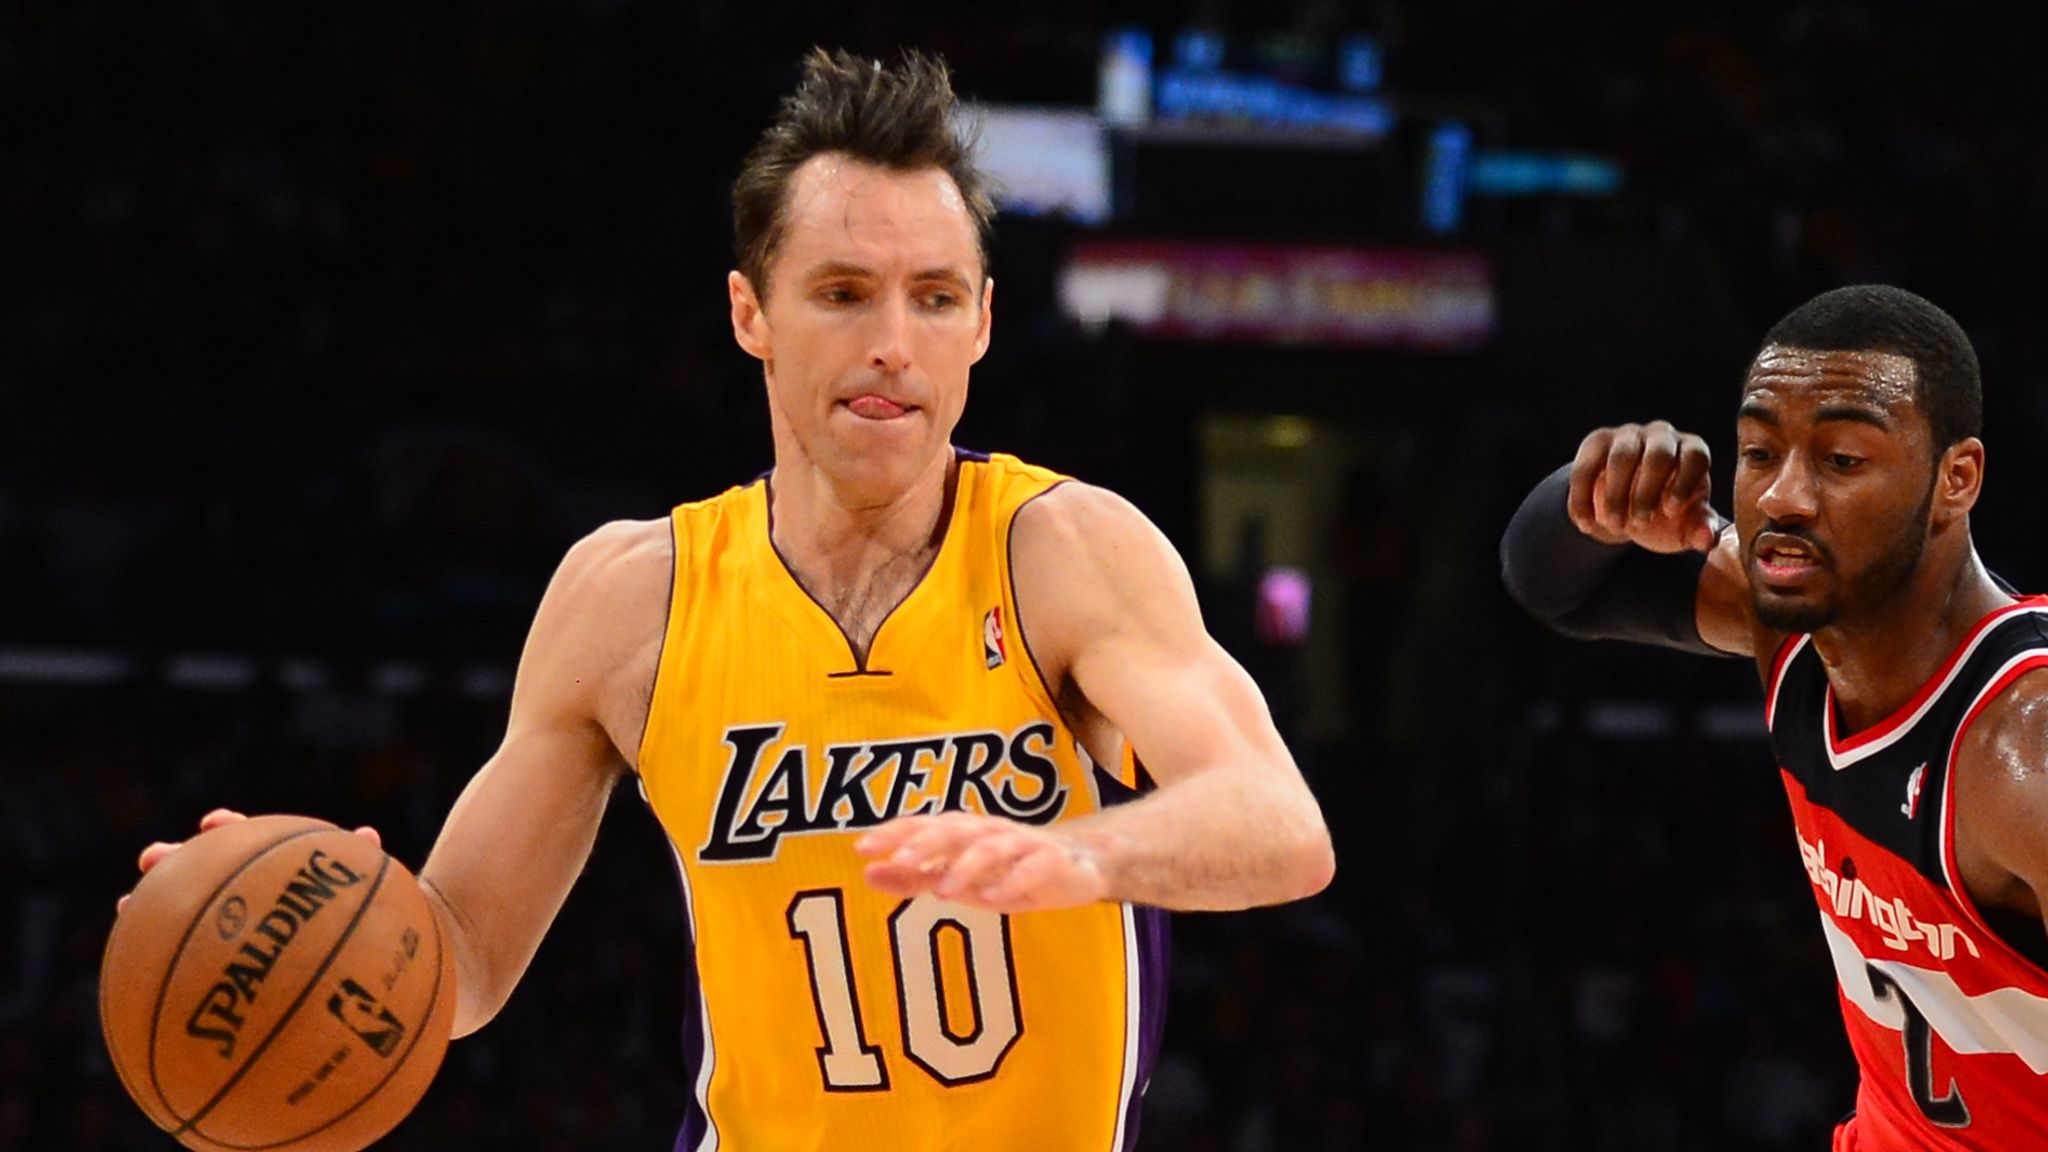 Steve Nash announces his retirement from the NBA